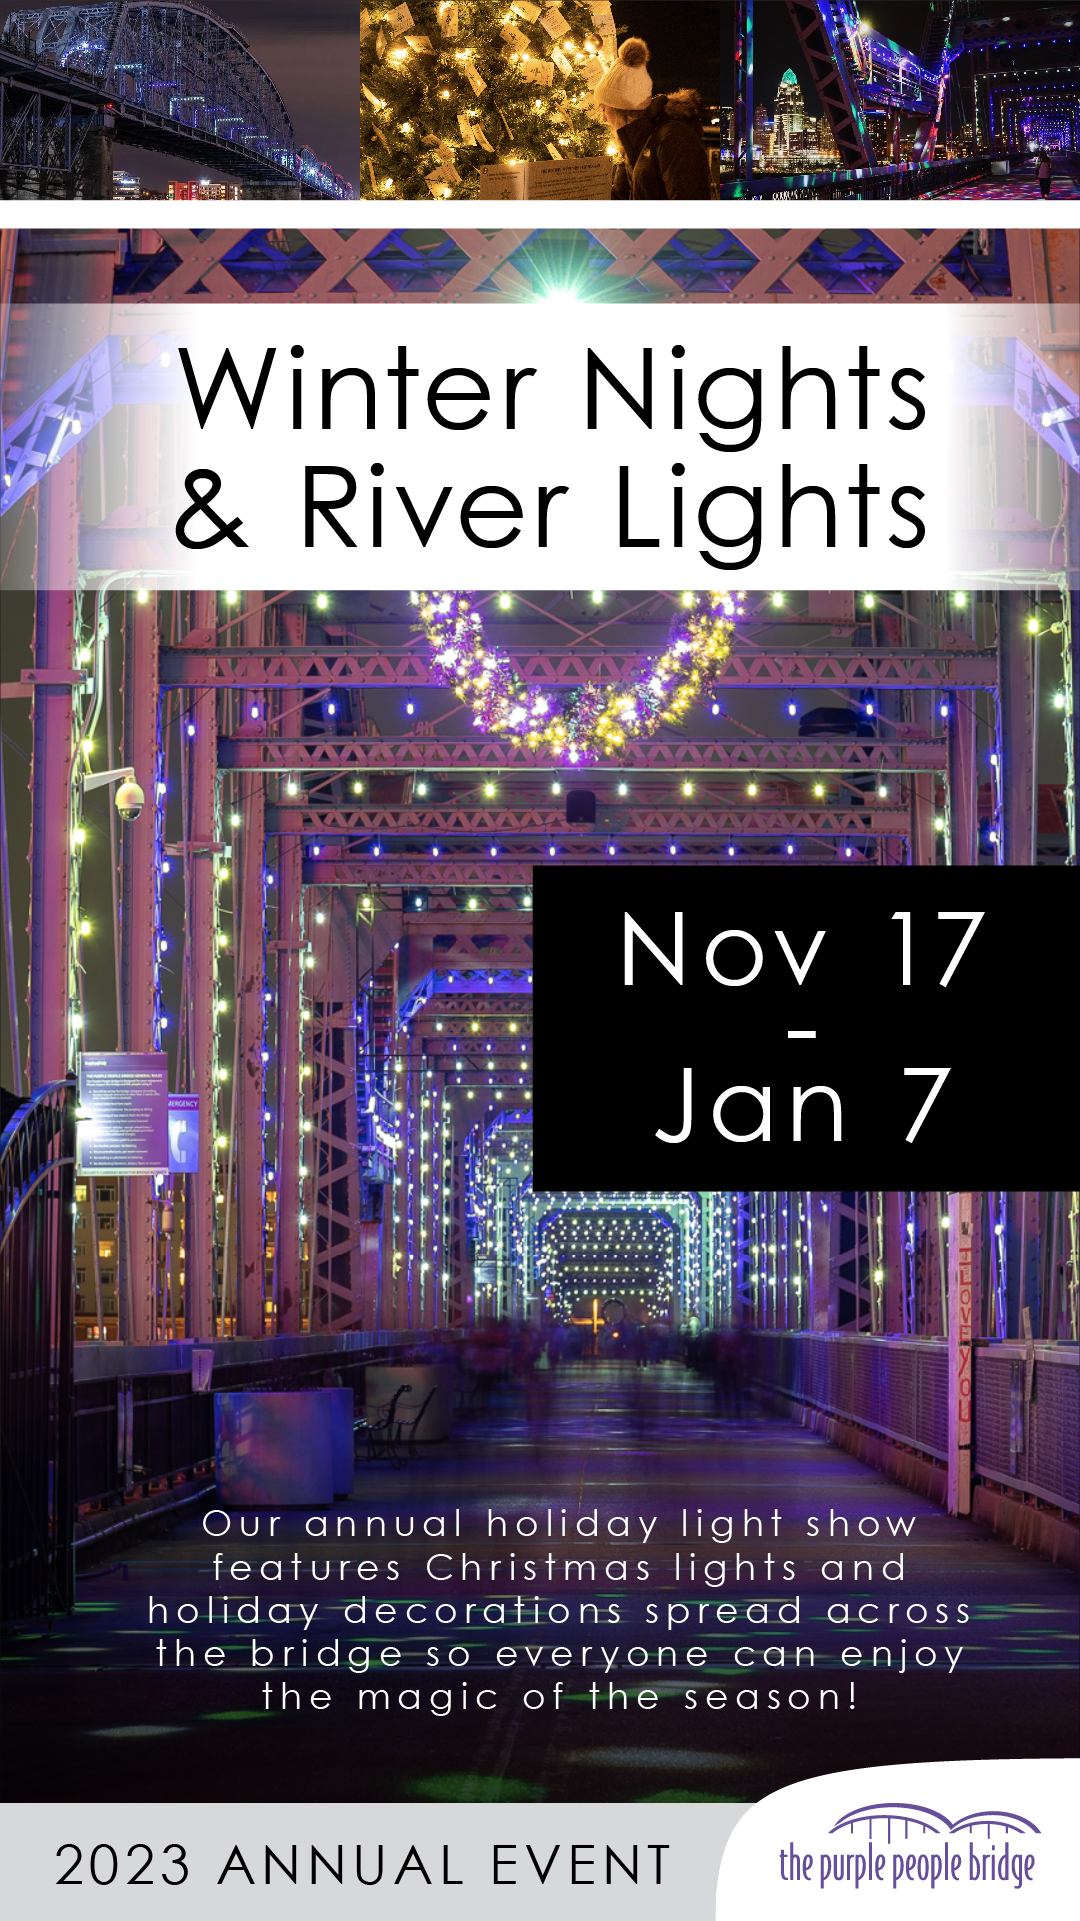 Winter Nights & River Lights | Nov 17-Jan 7 | Our annual holiday light show features Christmas lights and holiday decorations spread across the bridge so everyone can enjoy the magic of the season!